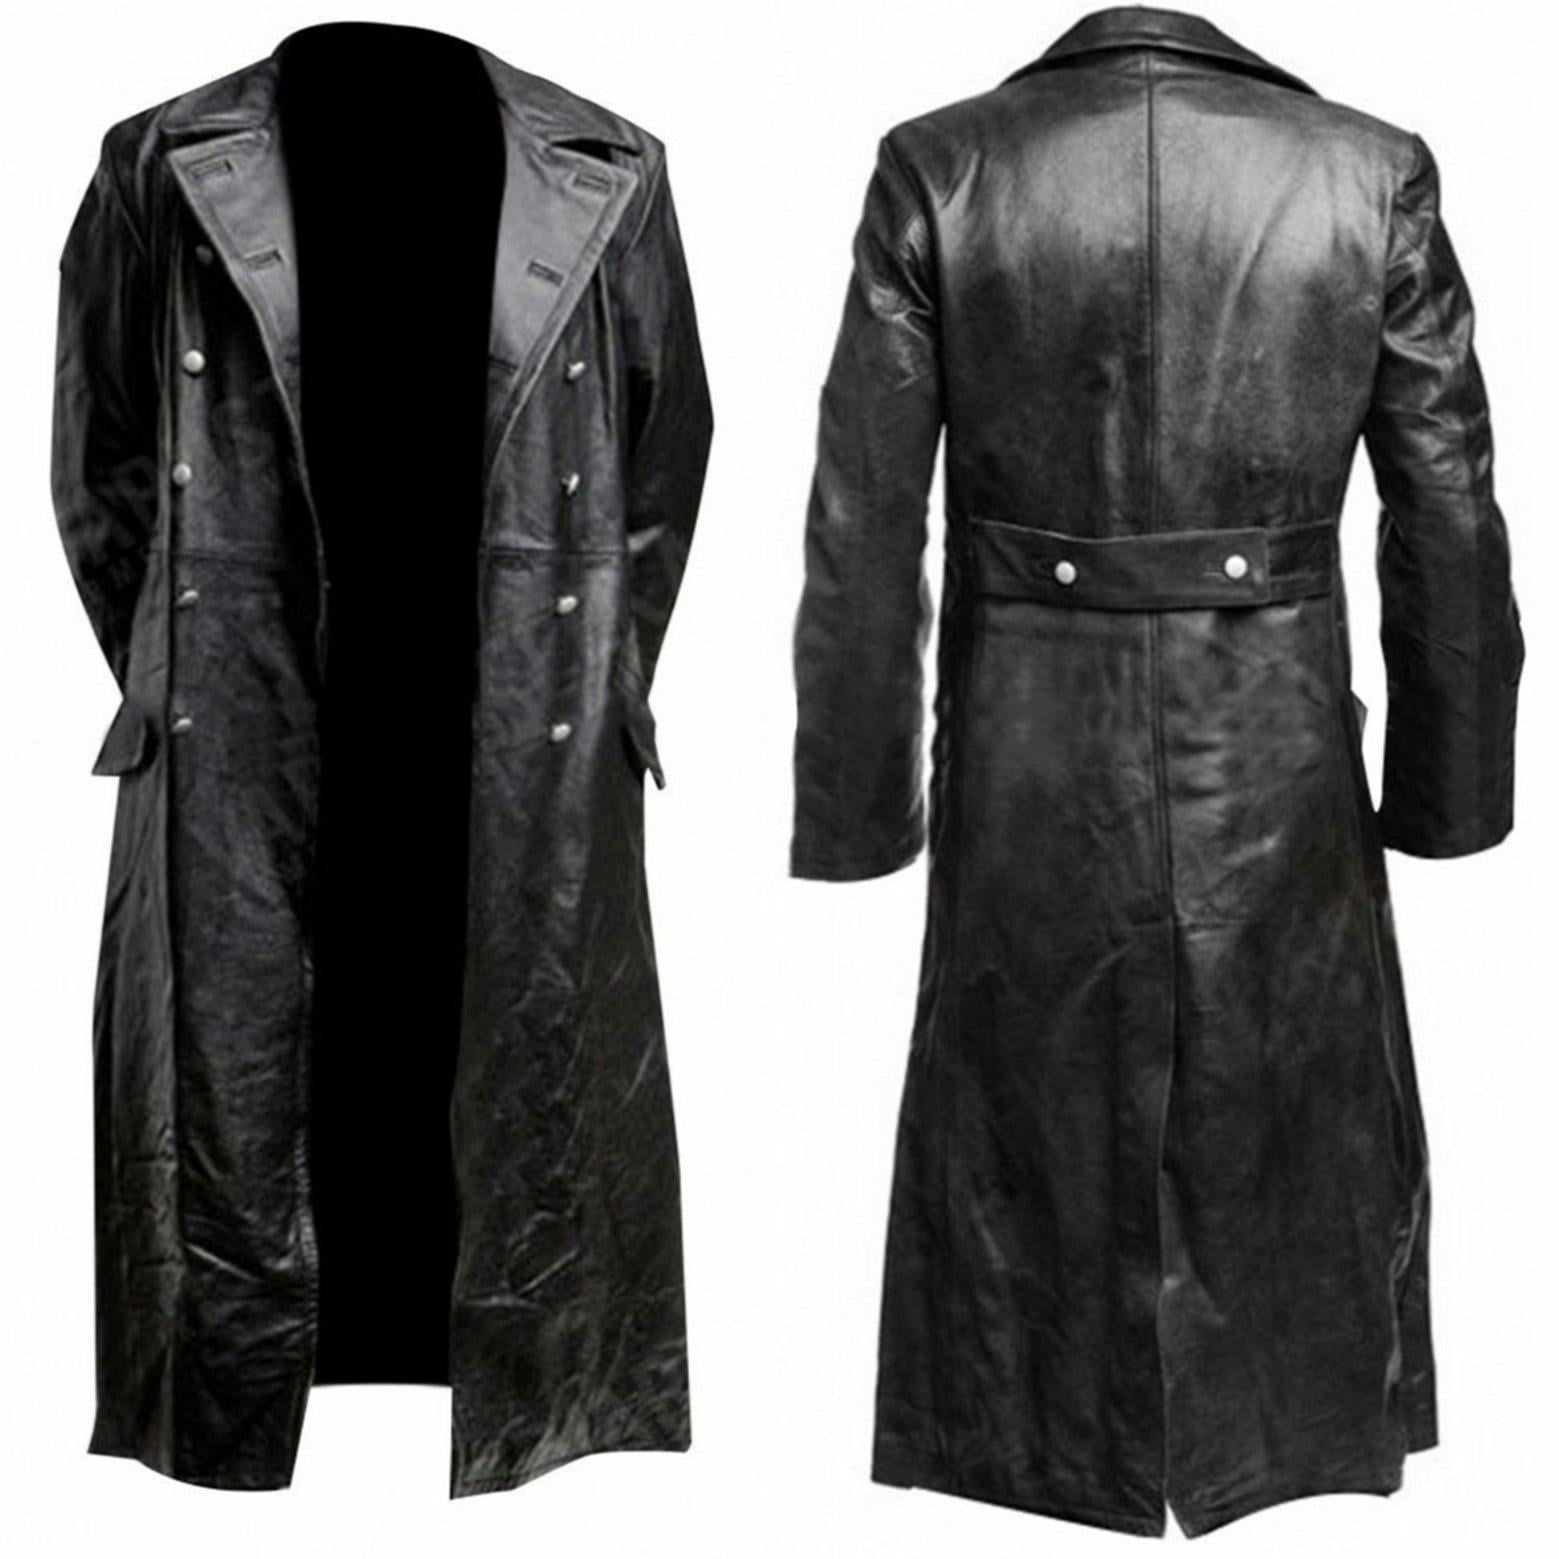 MENS GERMAN CLASSIC WW2 OFFICER MILITARY UNIFORM BLACK LEATHER TRENCH COAT 